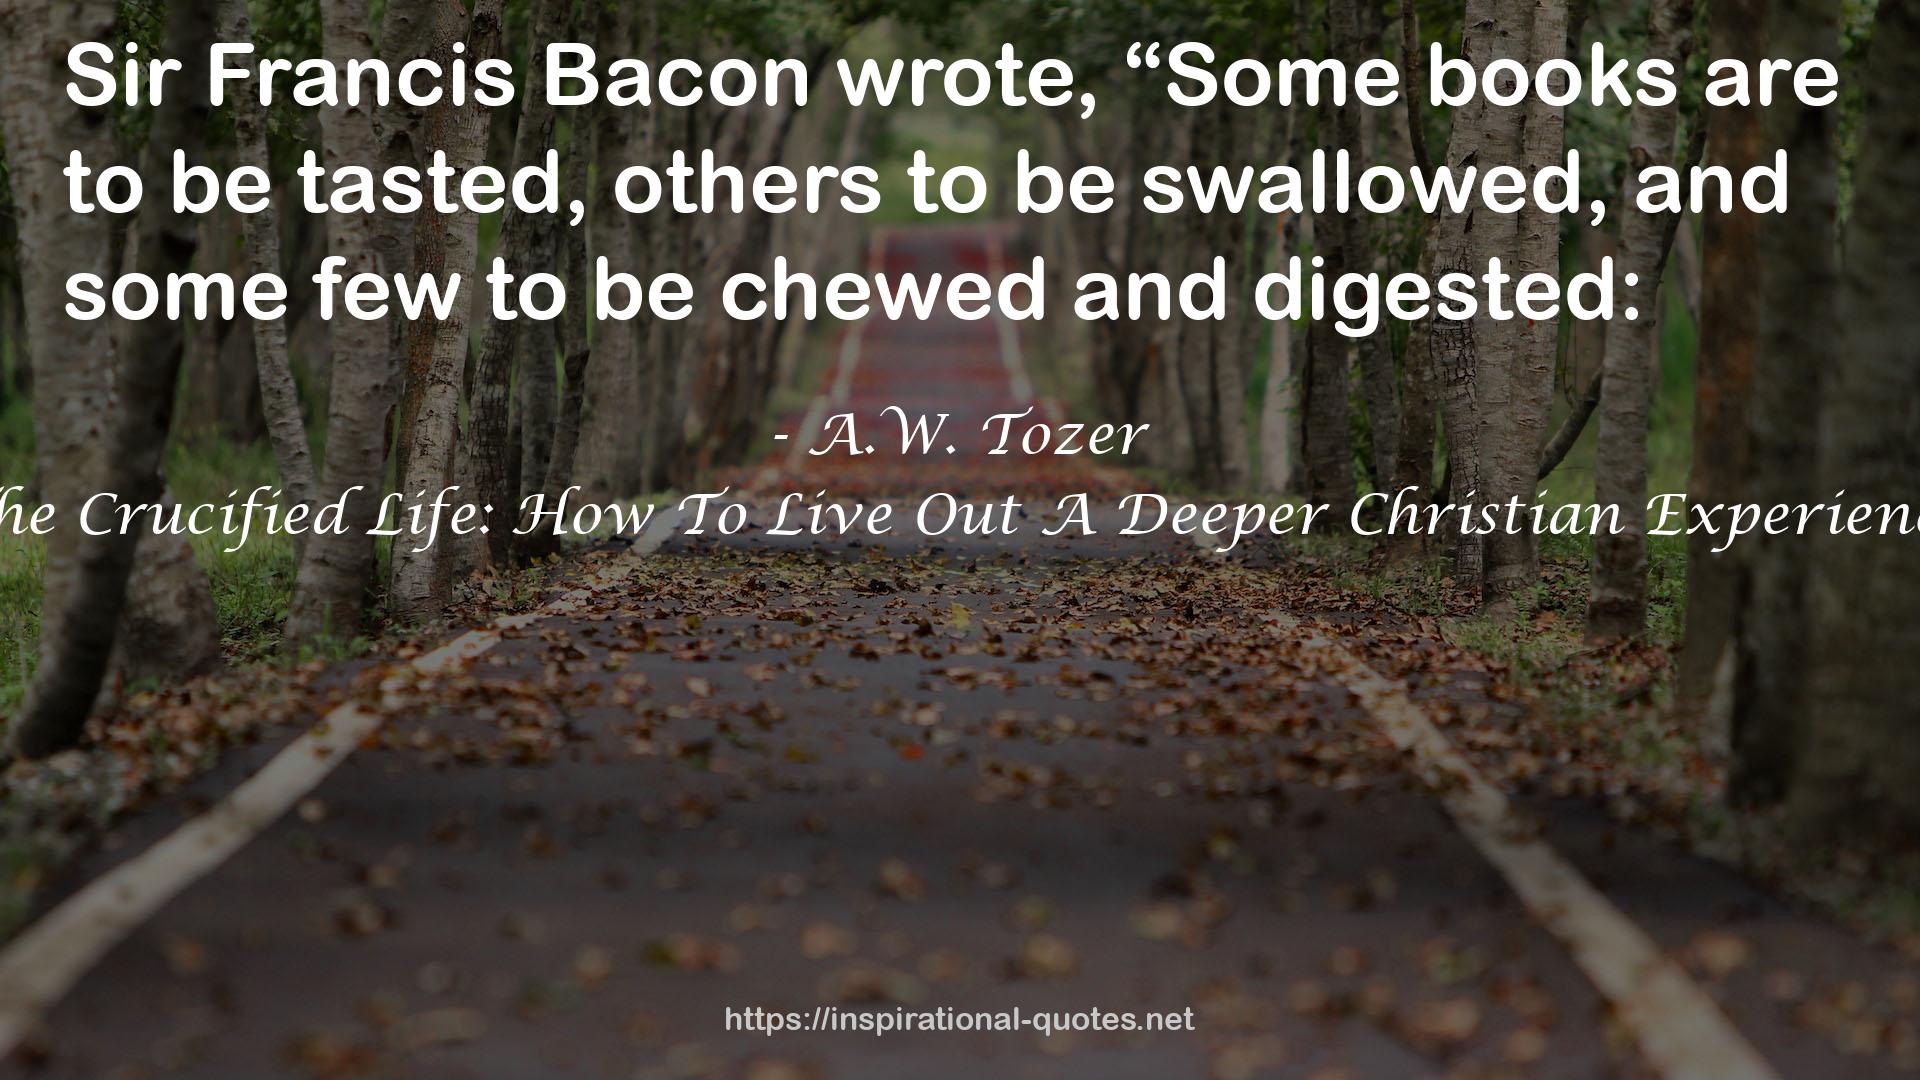 The Crucified Life: How To Live Out A Deeper Christian Experience QUOTES